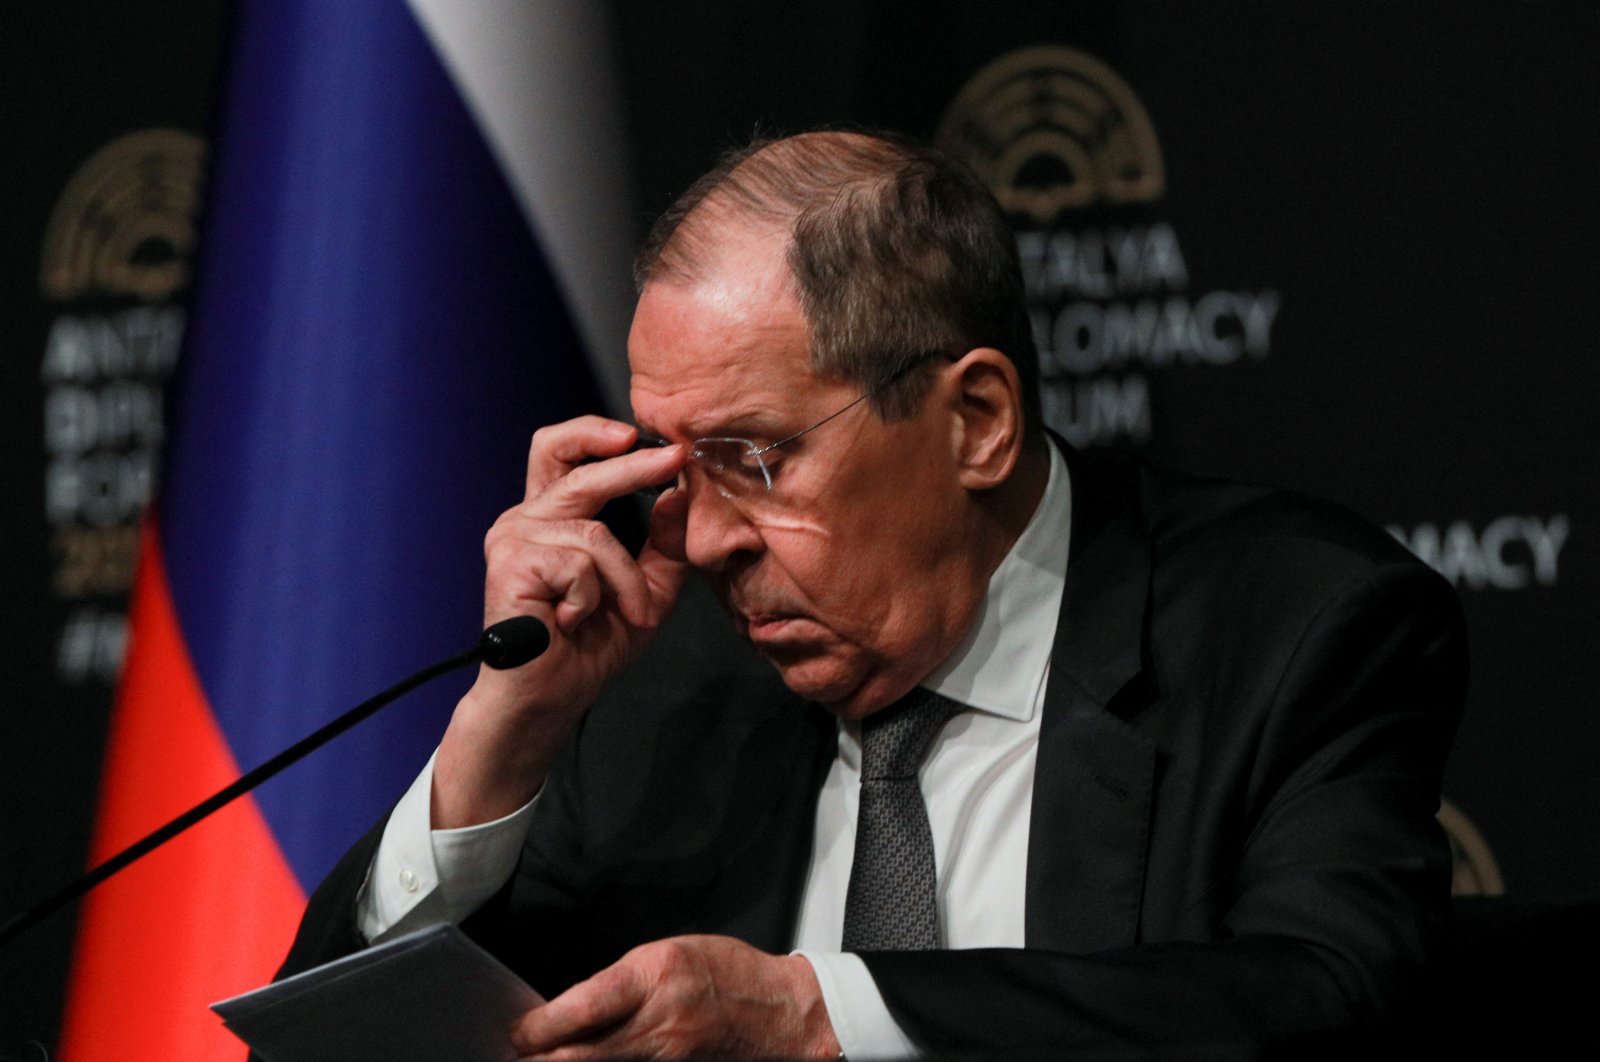 Russian Foreign Minister Sergei Lavrov adjusts his glasses during a news conference after meeting with his counterparts Ukrainian Dmytro Kuleba and Mevlut Çavuşoğlu, amid Russia&#039;s invasion of Ukraine, in Antalya, Turkey March 10, 2022. (Reuters Photo)